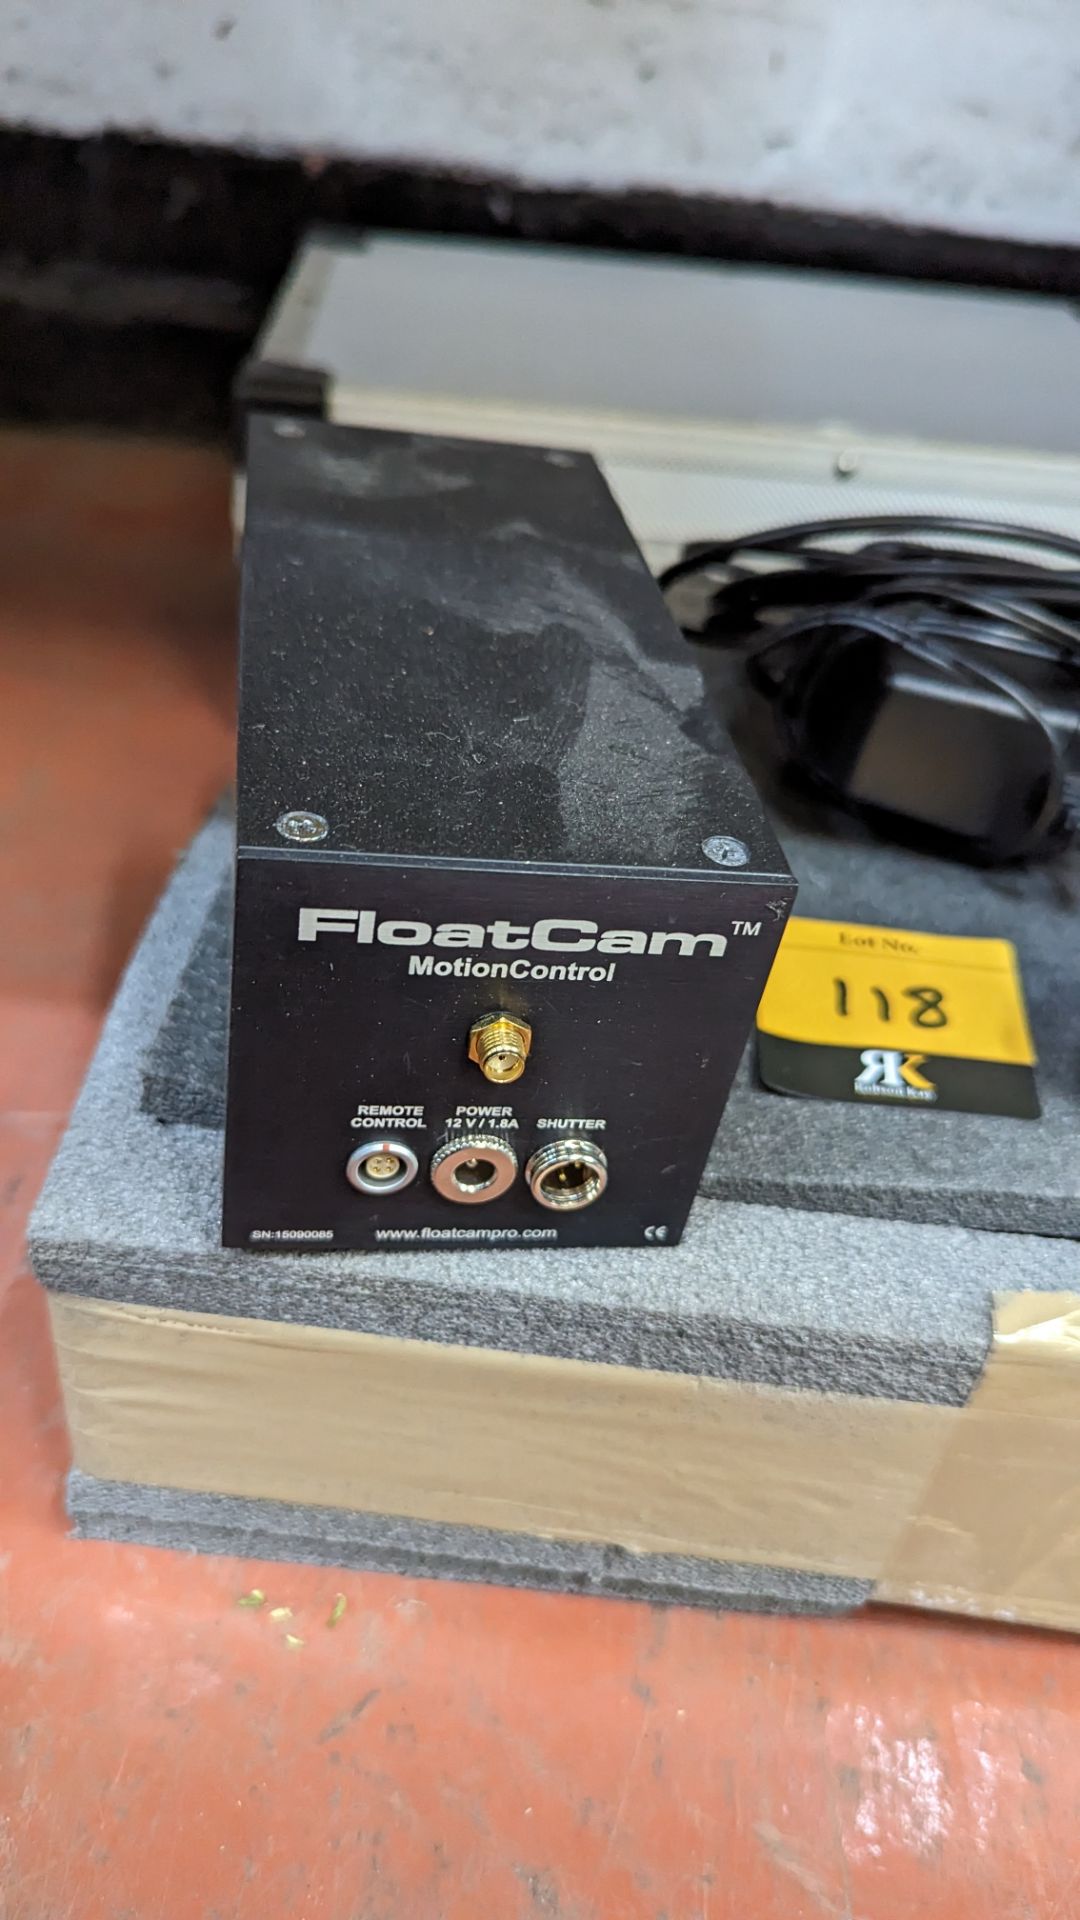 Floatcam wireless remote control system for Floatcam mini jib, slider & tower - Image 8 of 15